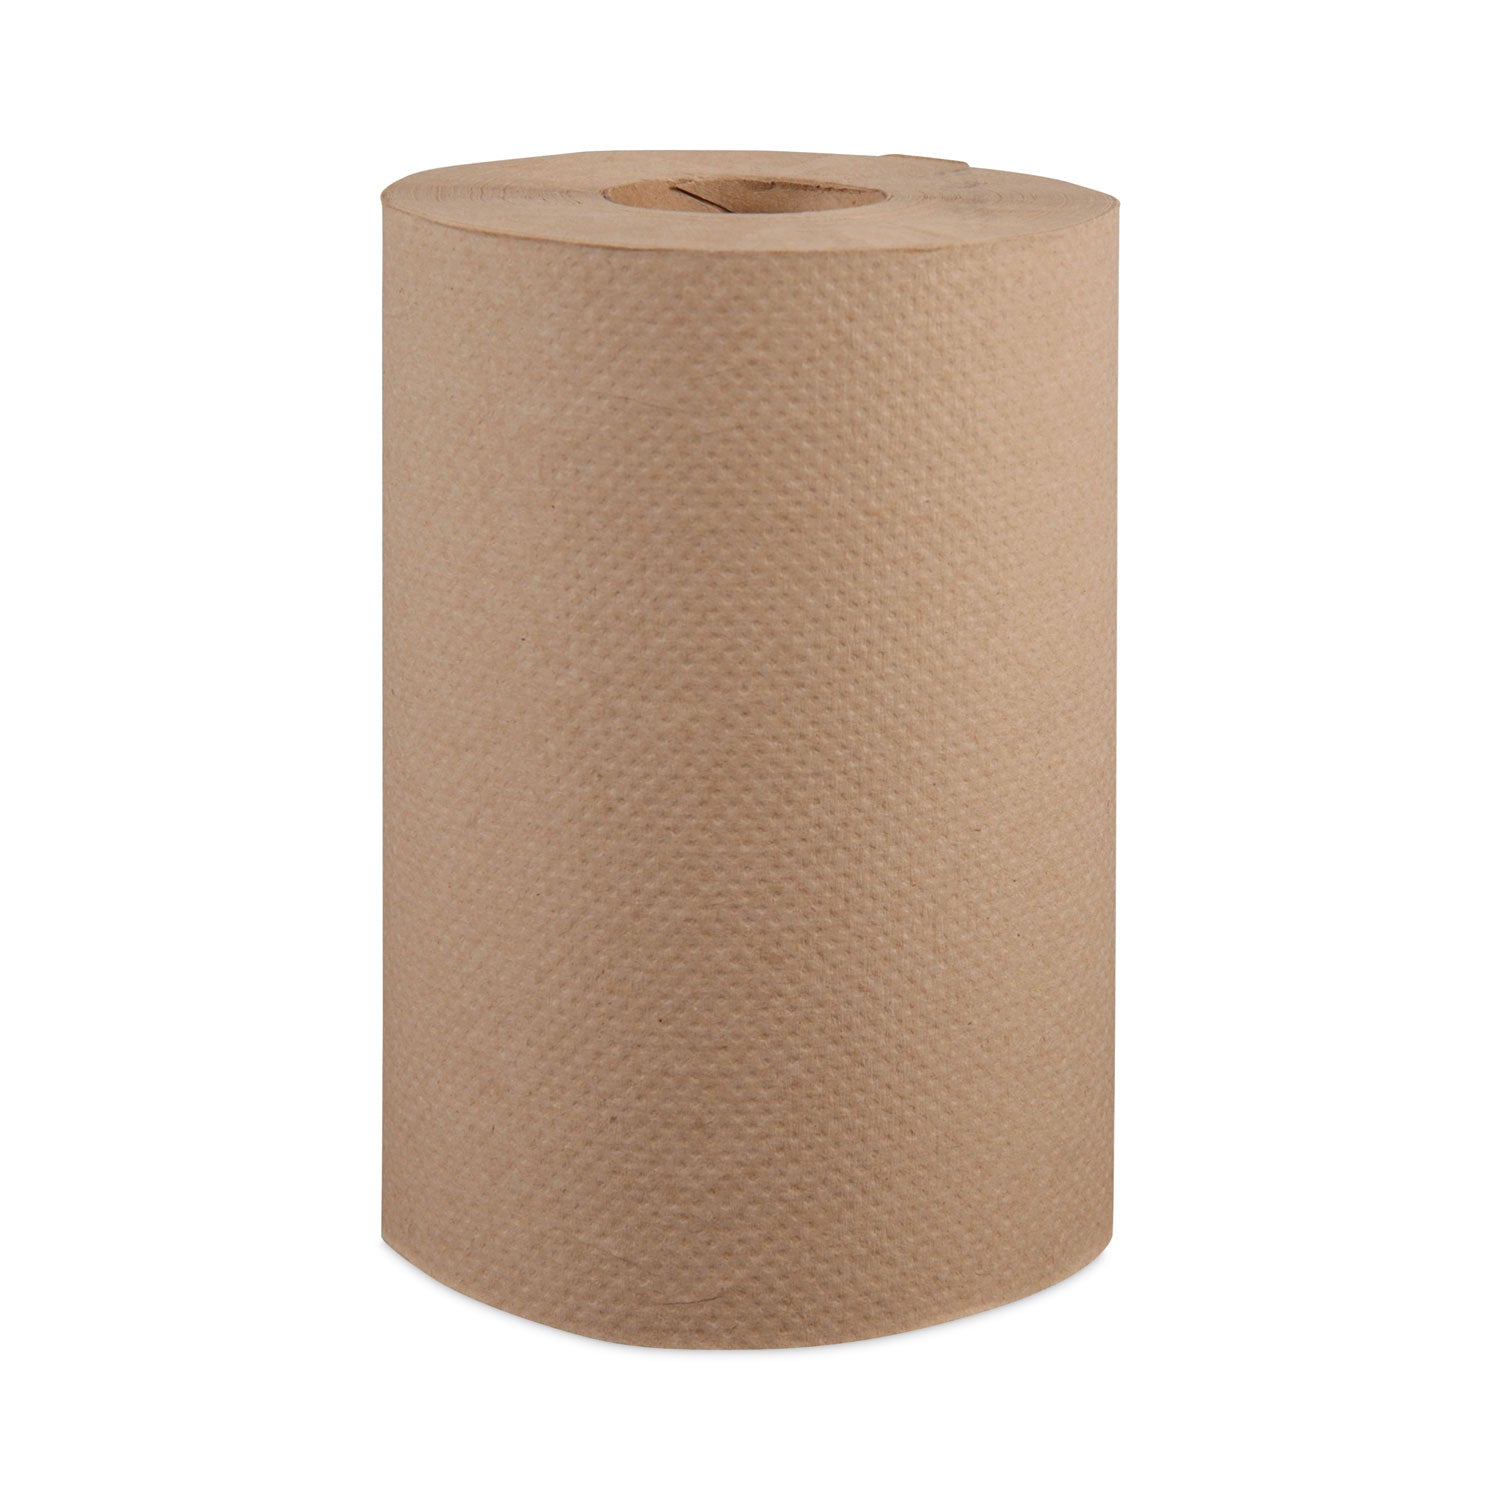 Hardwound Roll Towels, 1-Ply, 8" x 350 ft, Natural, 12 Rolls/Carton - 